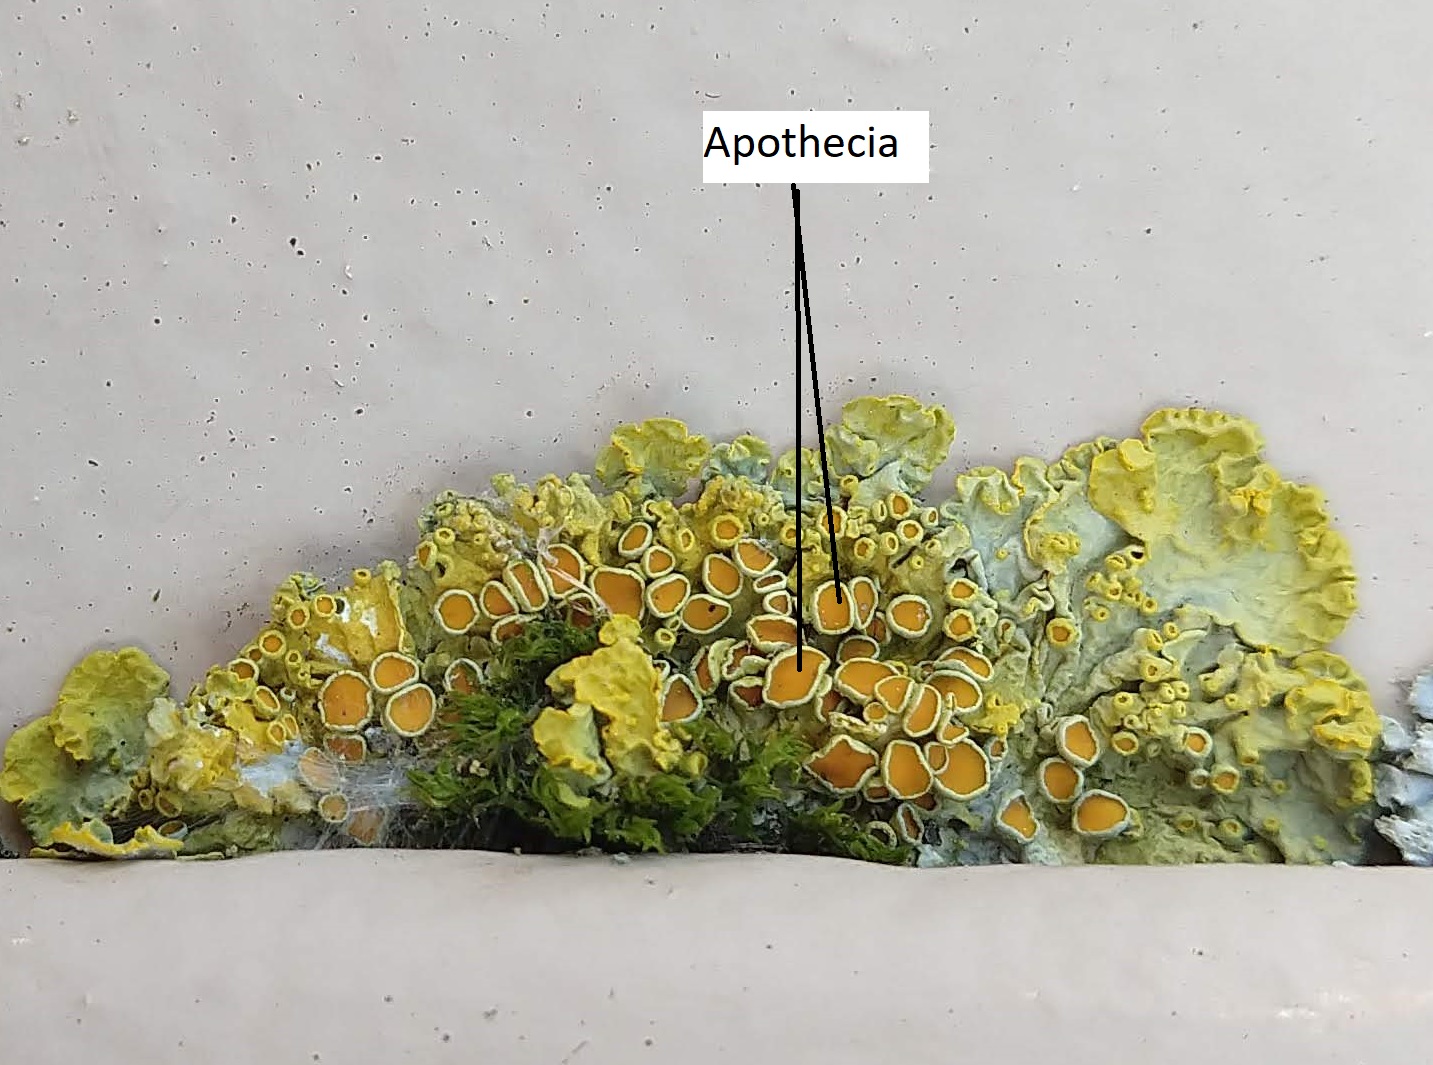 A lichen growing in a crack with two apothecia labelled 